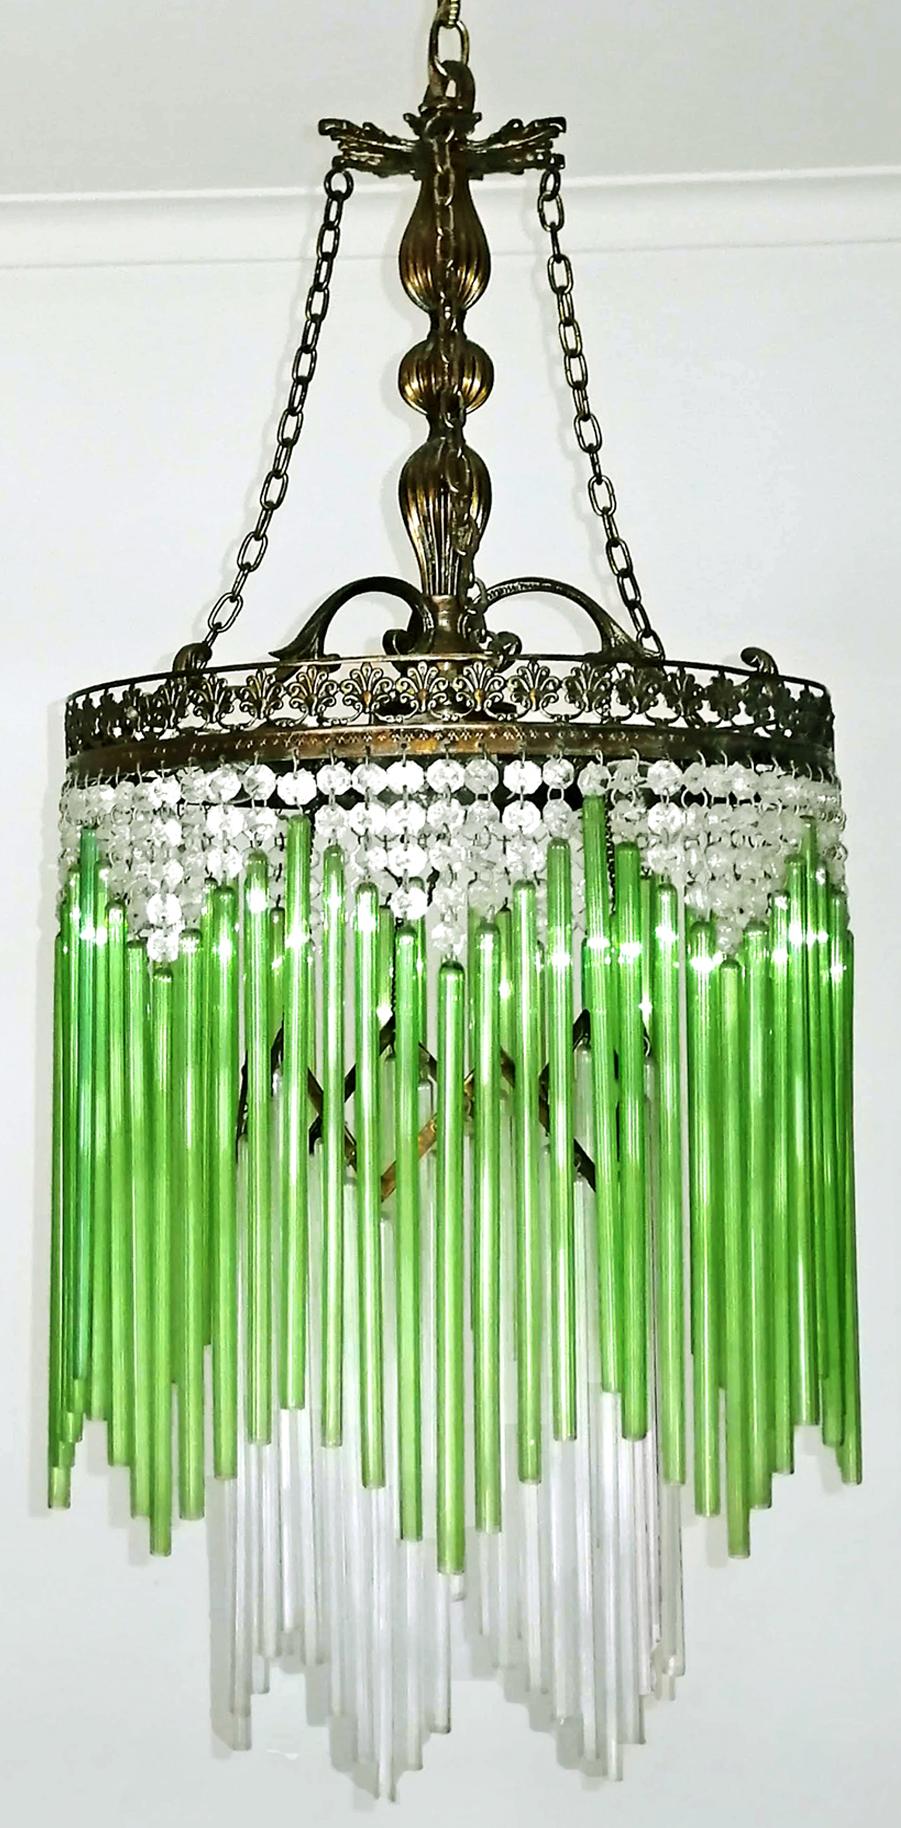 Beautiful French in clear, green fringe glass and crystal beaded Art Deco / Art Nouveau chandelier.
Measures:
Diameter 13 in/ 33 cm
Height 39,37 in(chain=10 in)/ 100 cm (chain=25cm)
4 light bulb each E14/ good working condition/European wiring.
Age